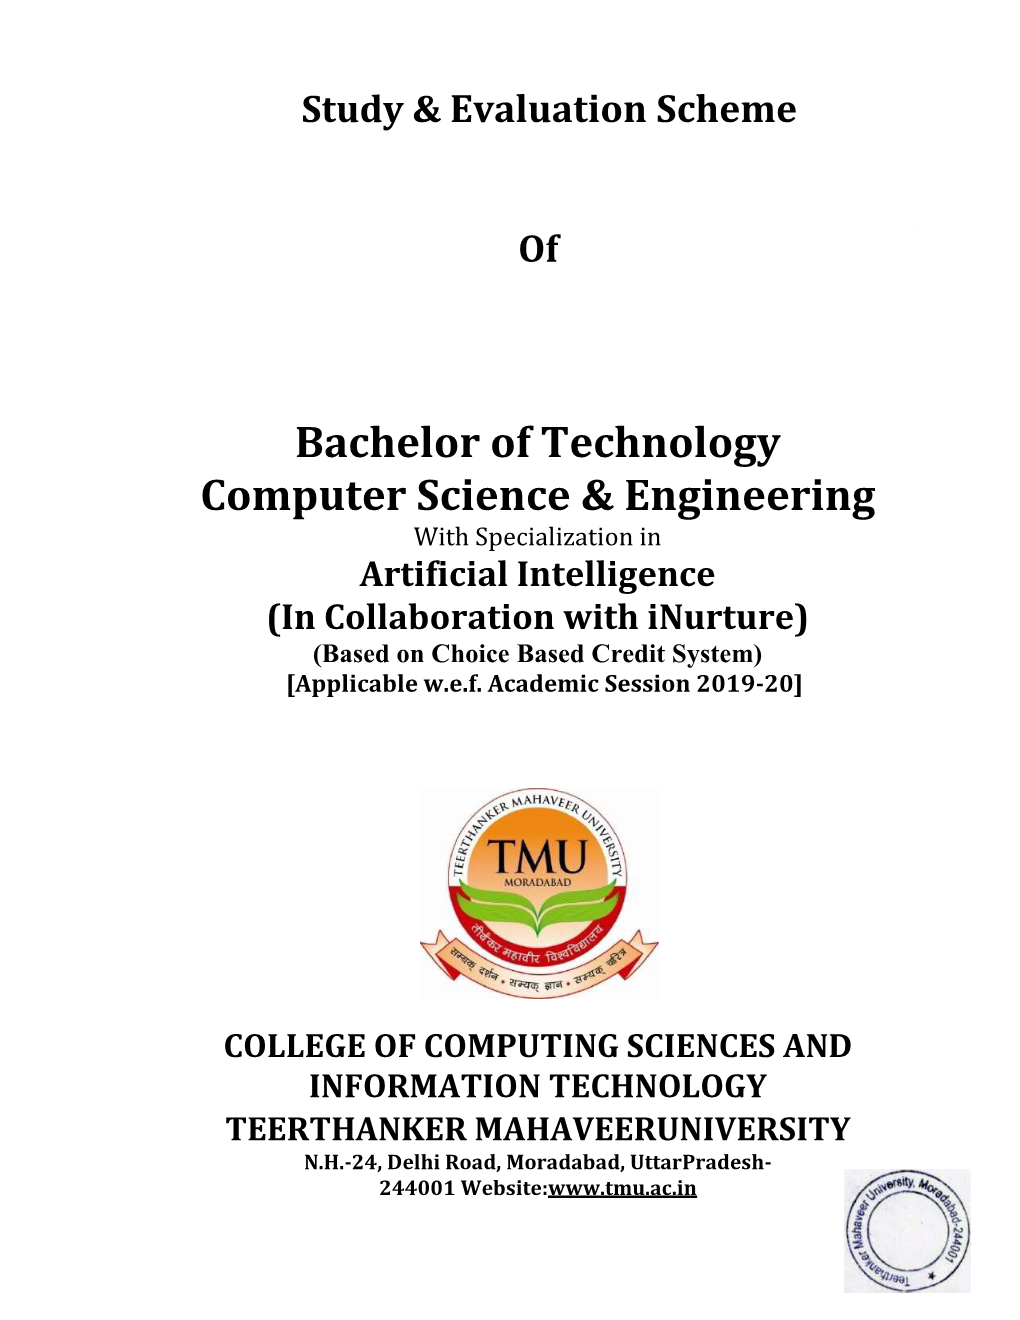 Bachelor of Technology Computer Science & Engineering